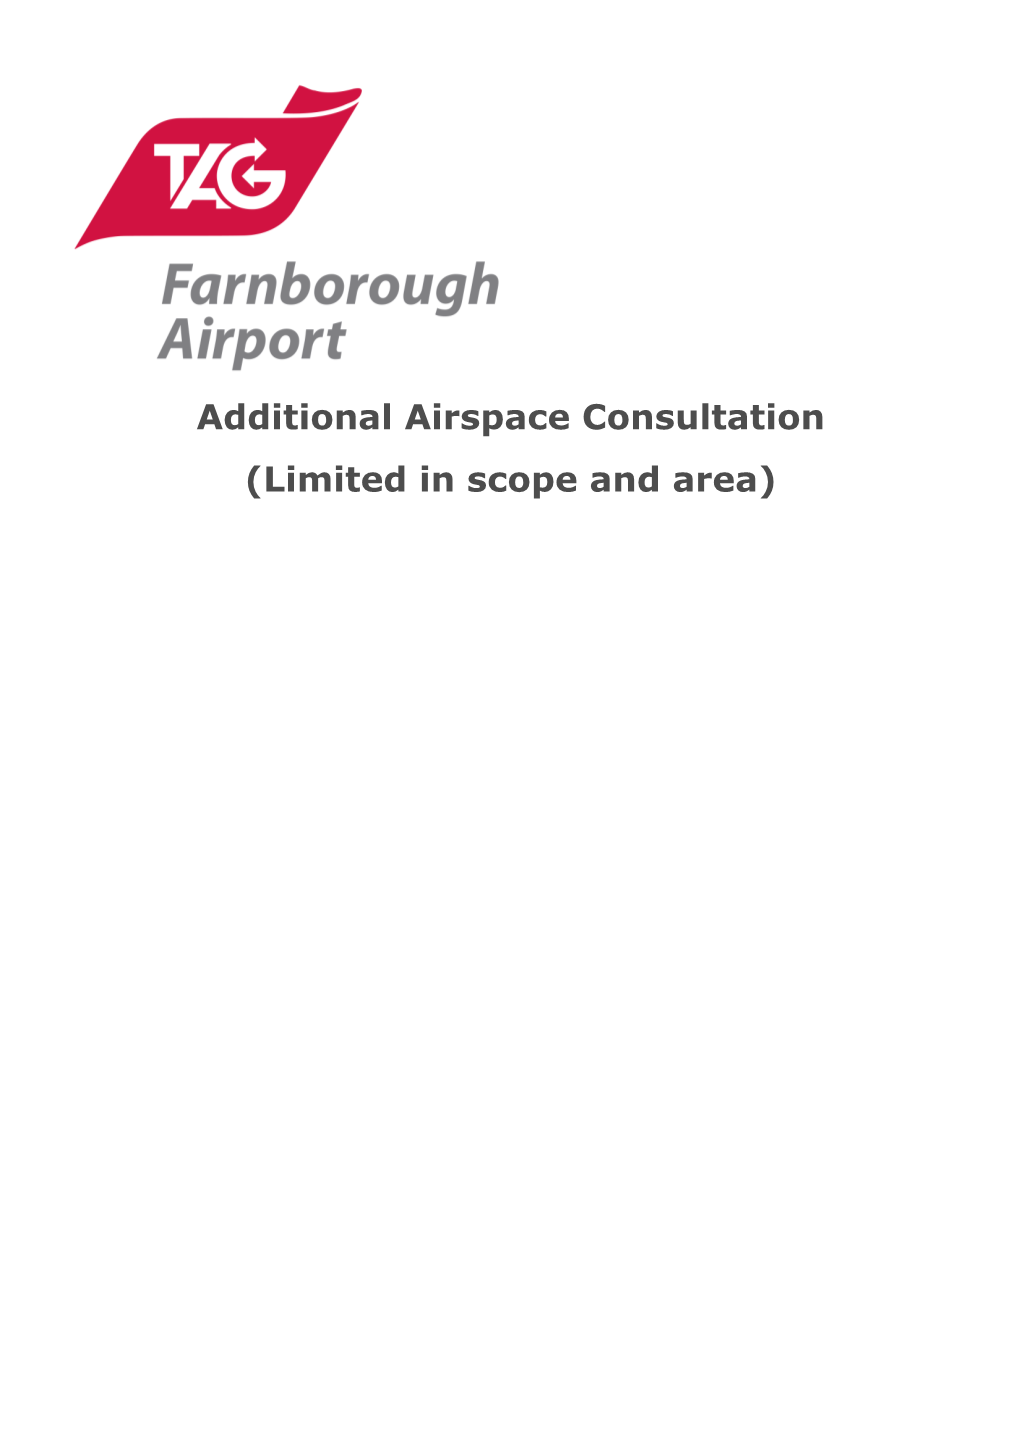 TAG Farnborough Airport Additional Limited Consultation